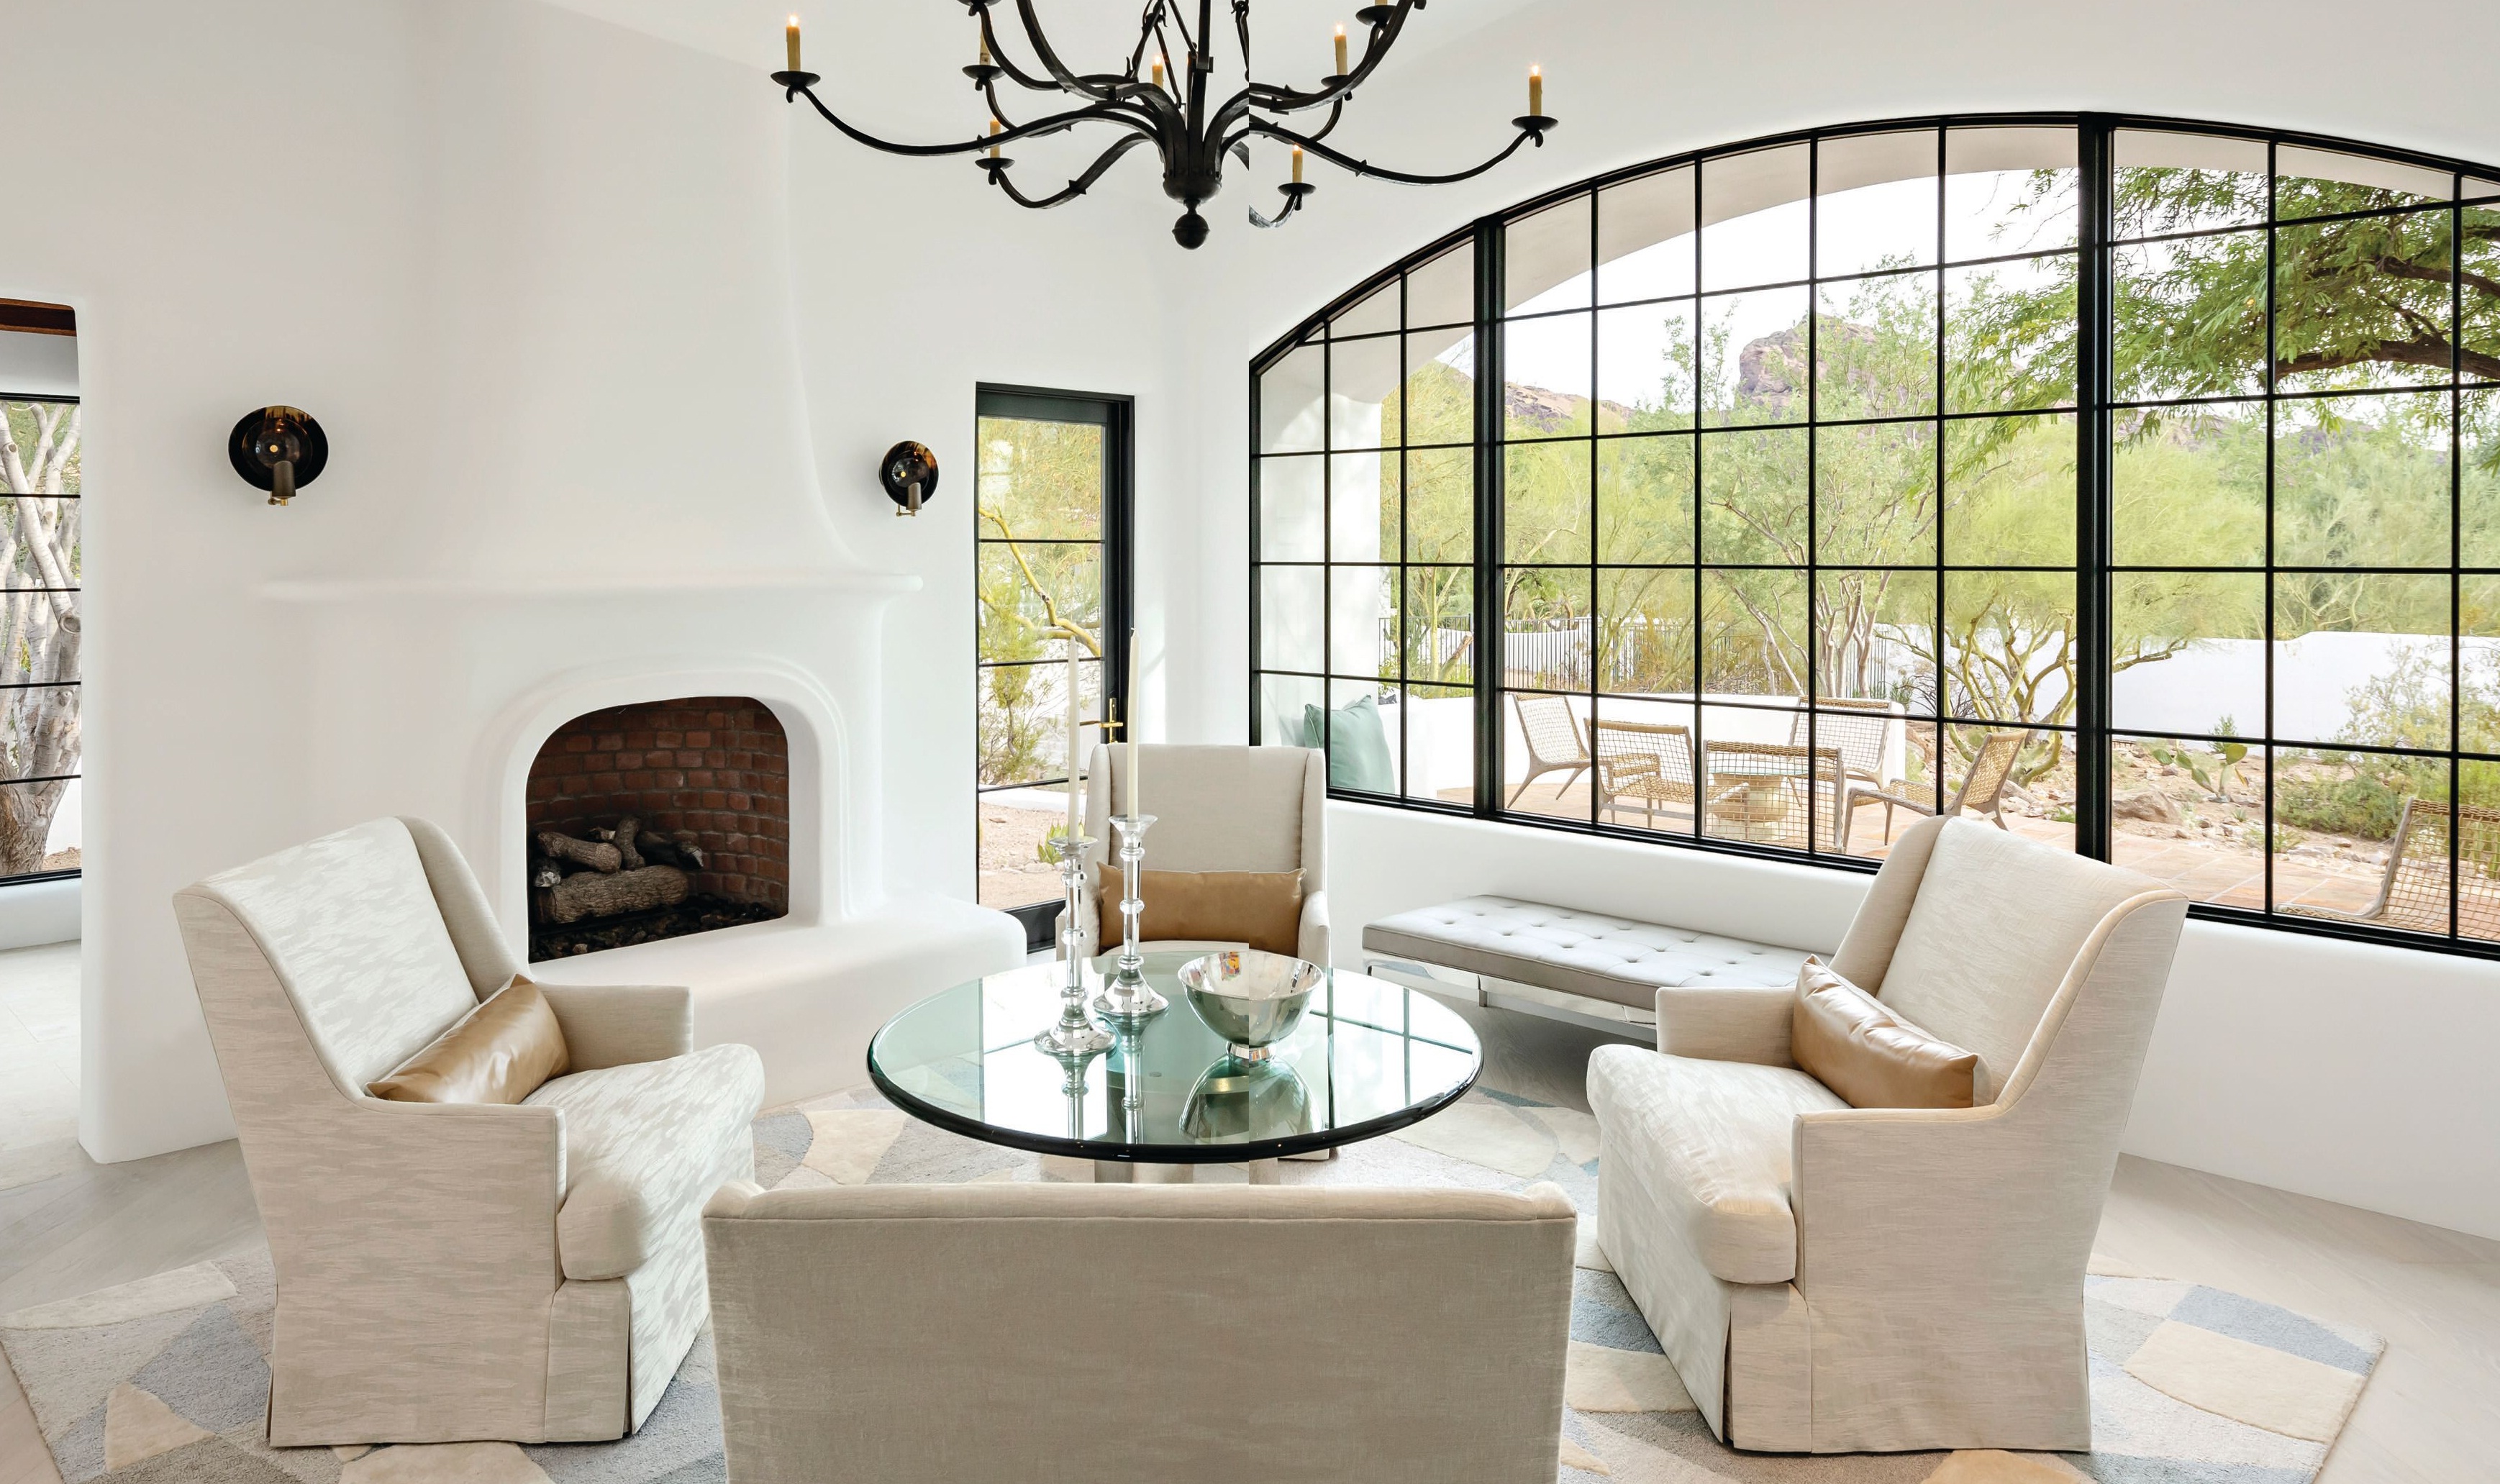 Designer Matthew Boland adjusted the plaster on the fireplace of this Paradise Valley home three times before finding the perfect final sculptural shape. Photographed by Joe Cotitta